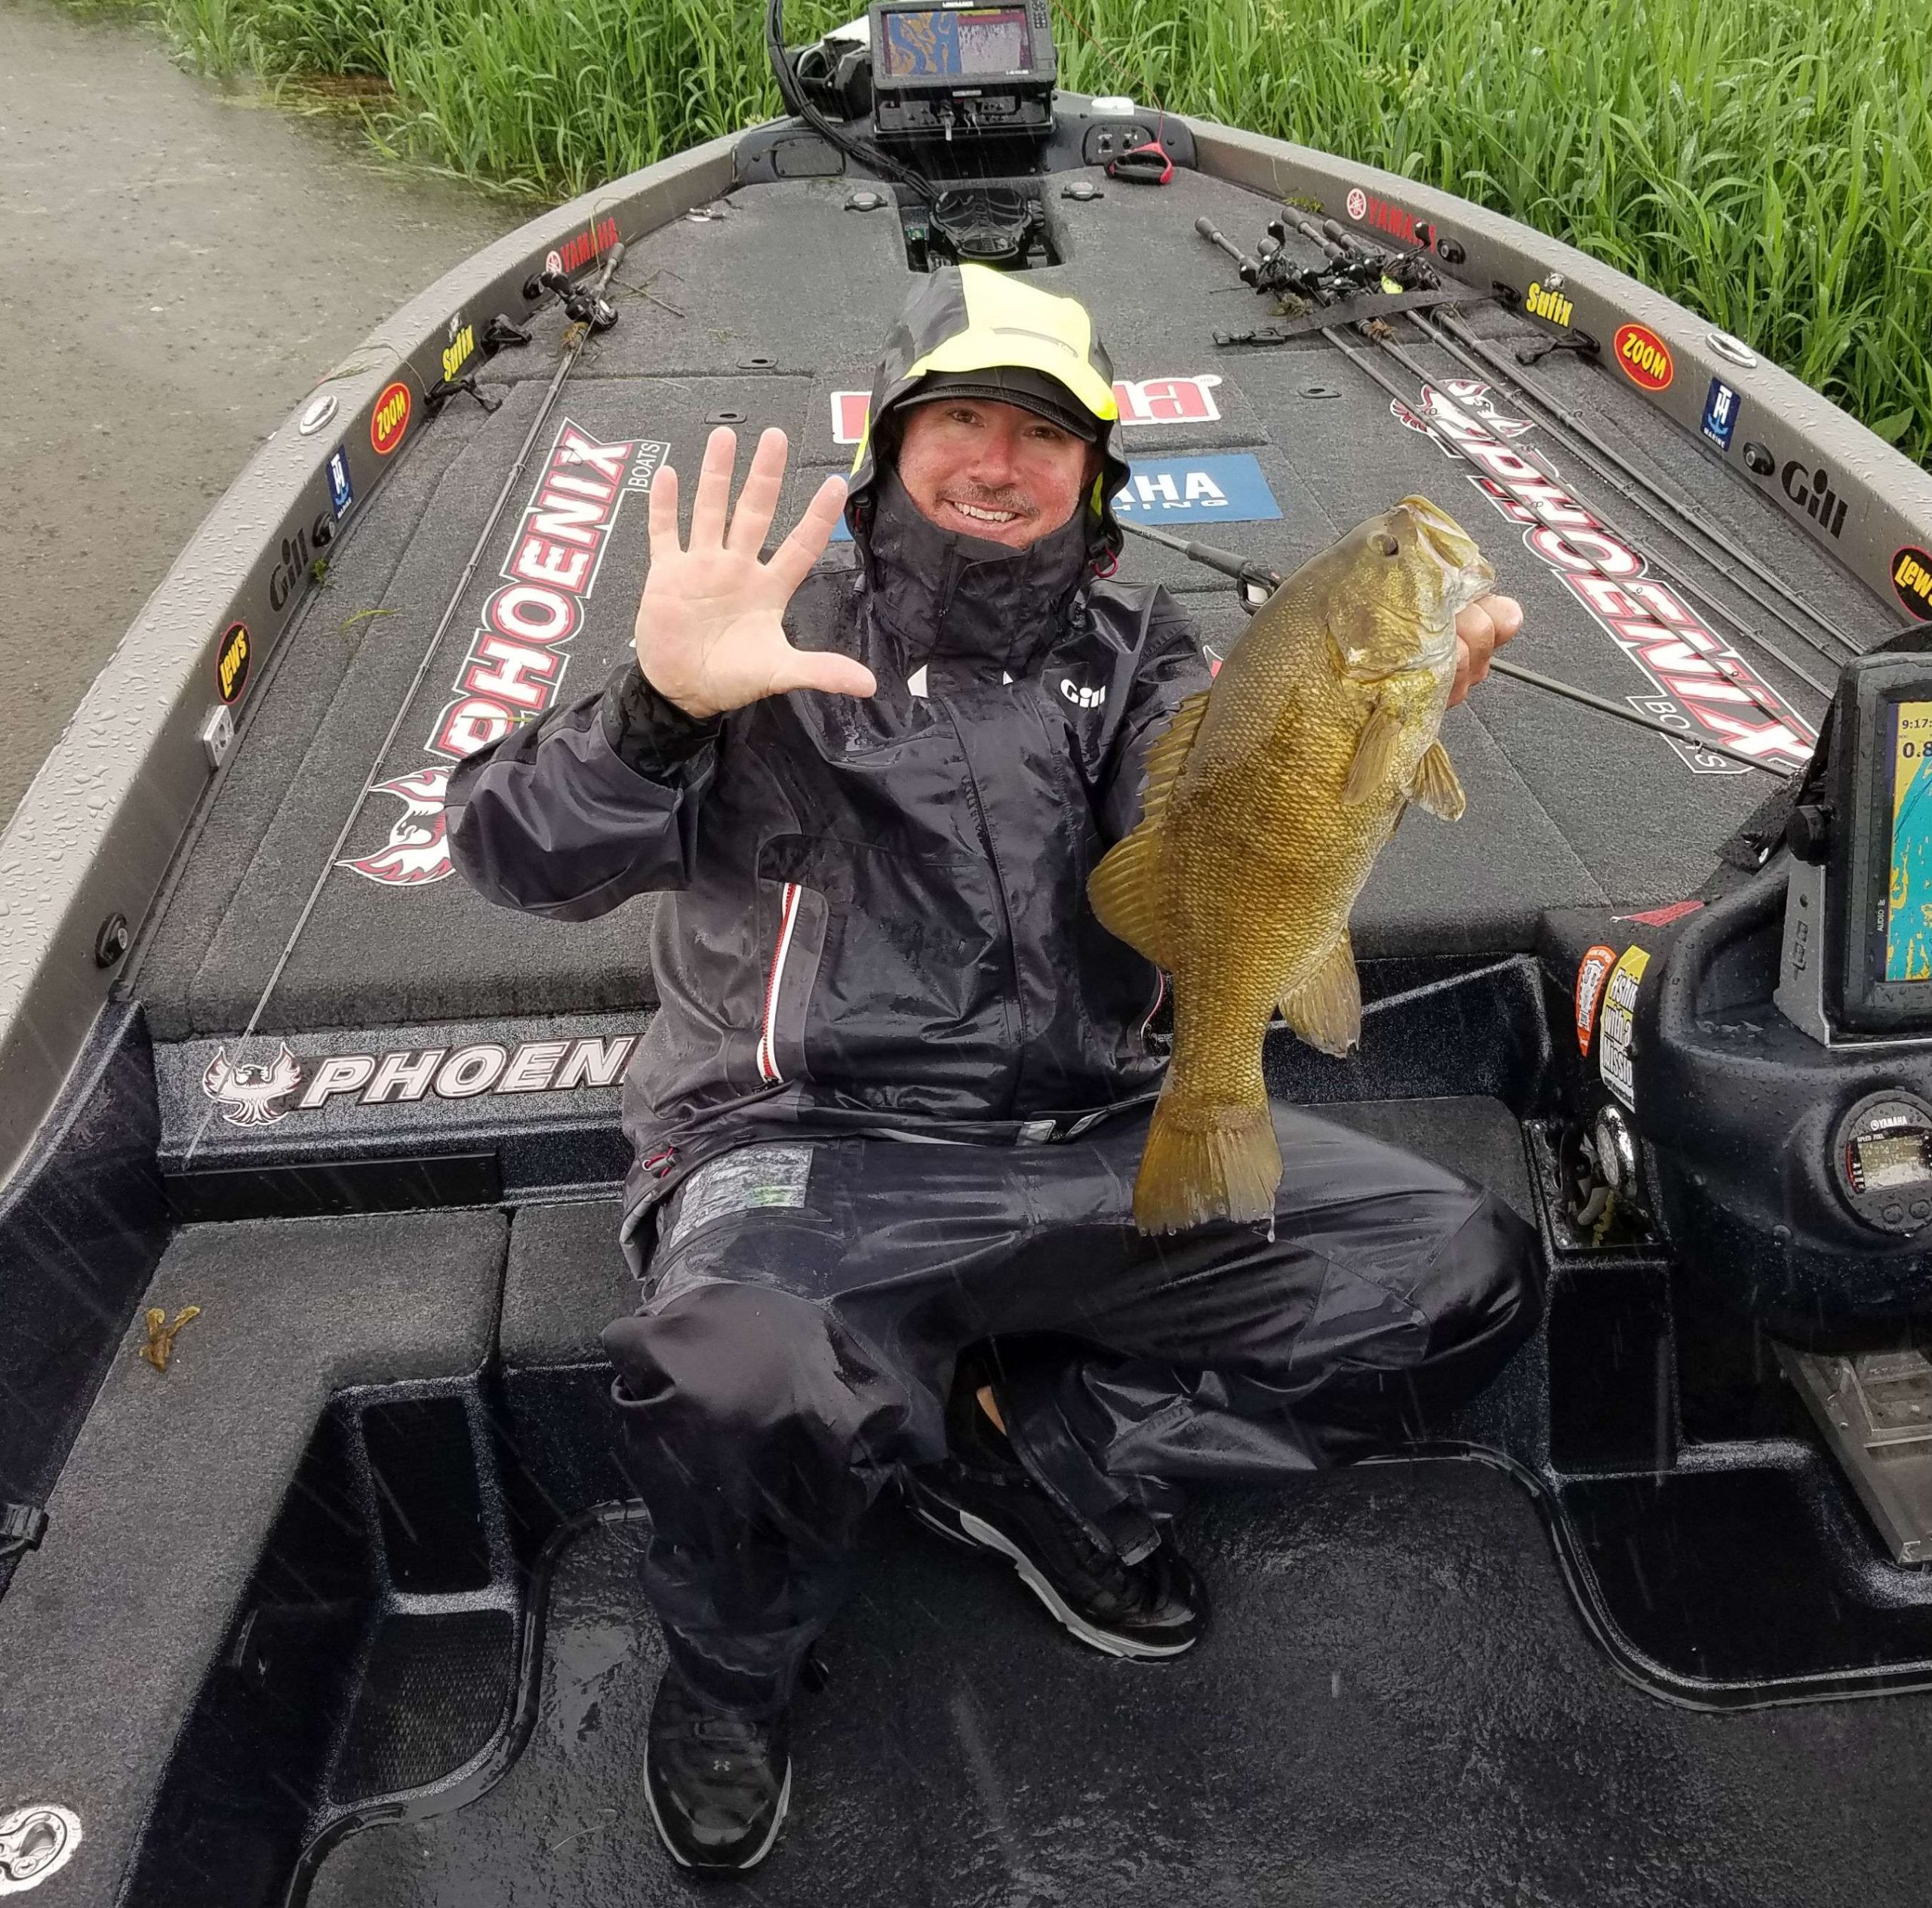 Randall Tharp has been grinding away with his flipping stick and has managed a few small upgrades to his limit.